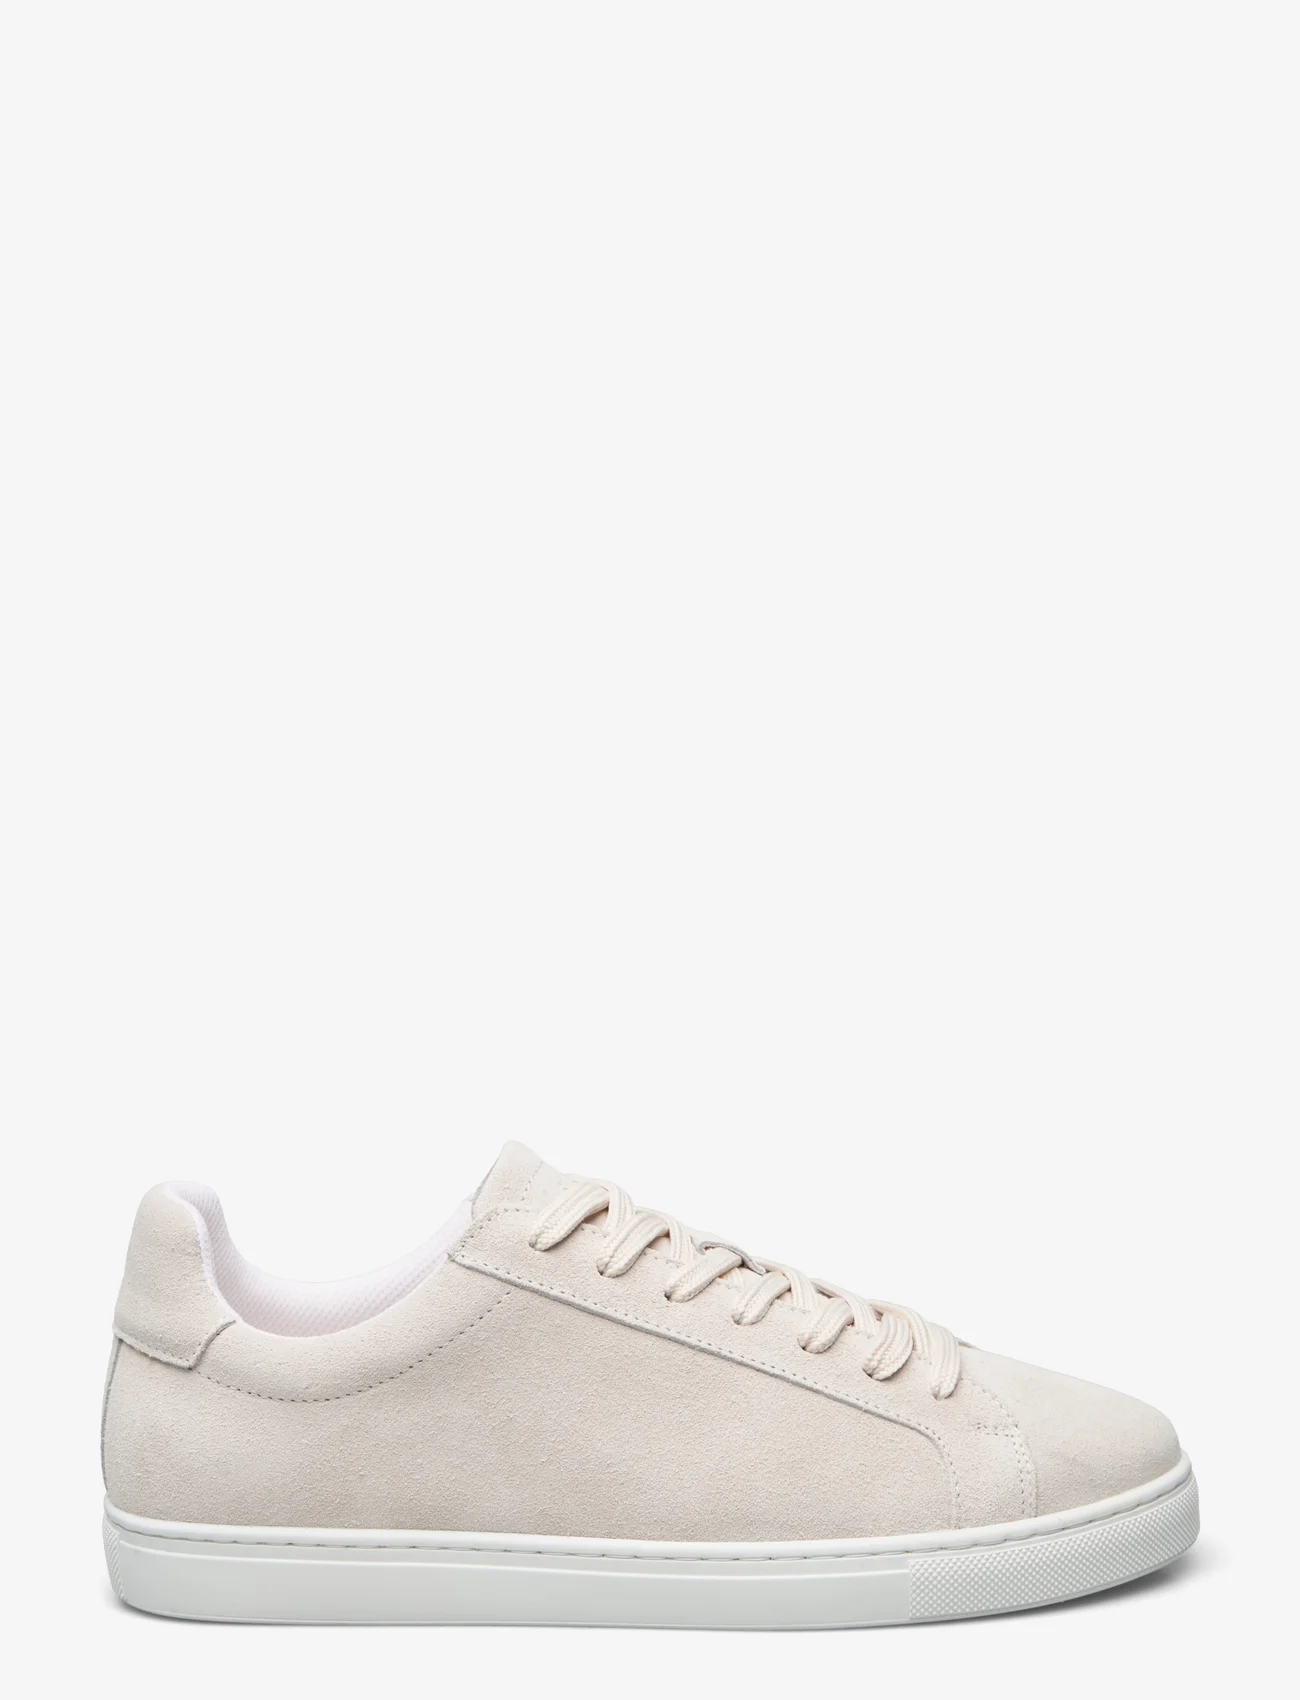 Selected Homme - SLHEVAN NEW SUEDE SNEAKER - lave sneakers - white - 1